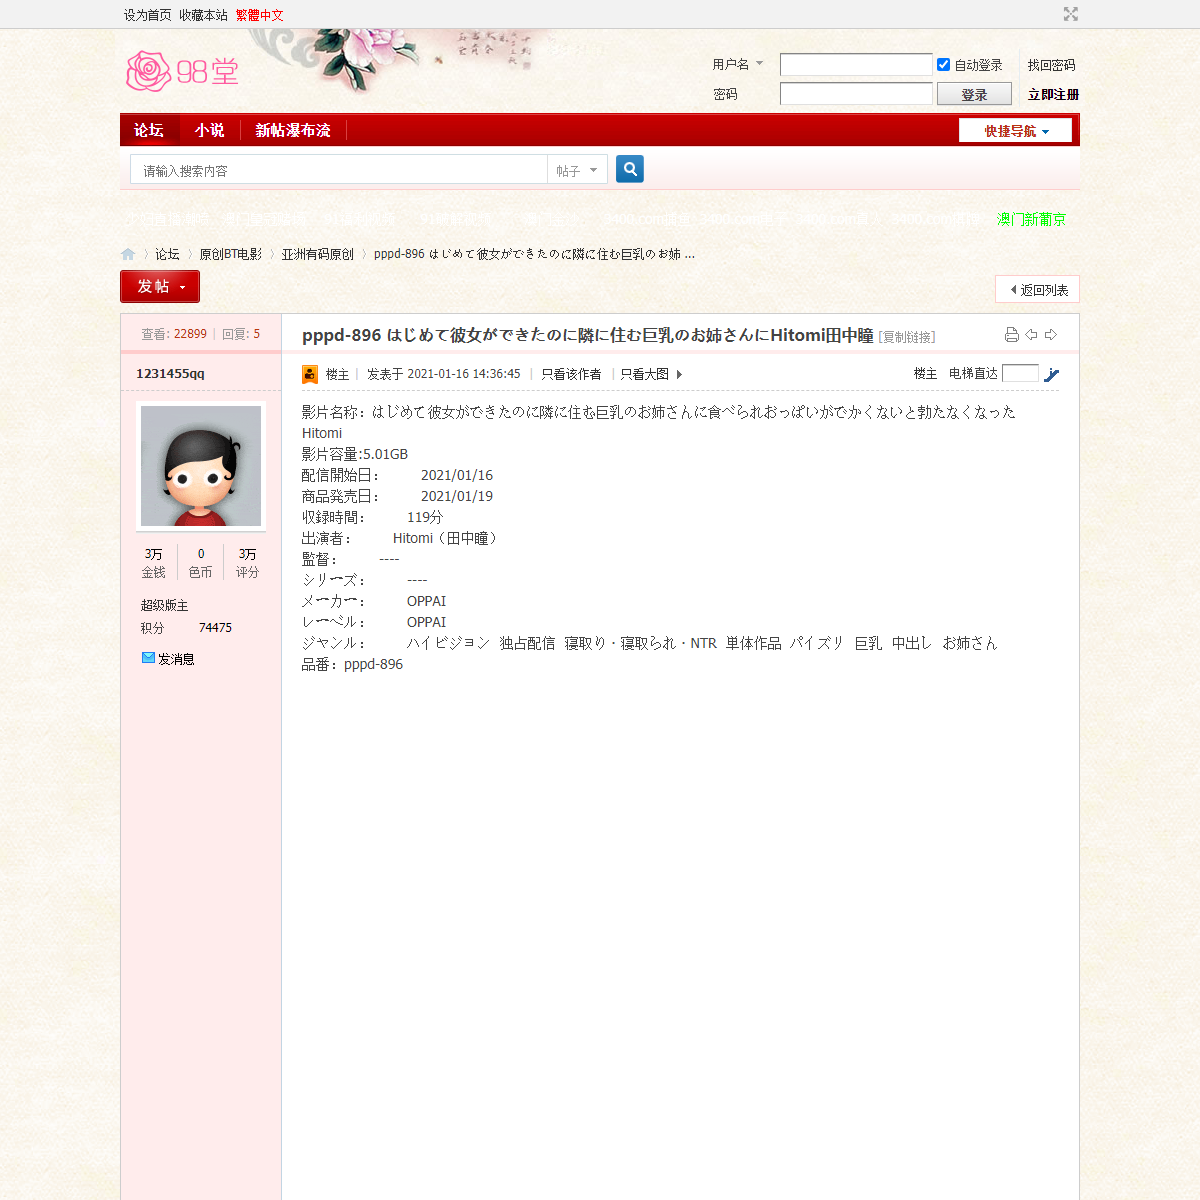 A complete backup of https://www.sehuatang.net/thread-444078-1-1.html